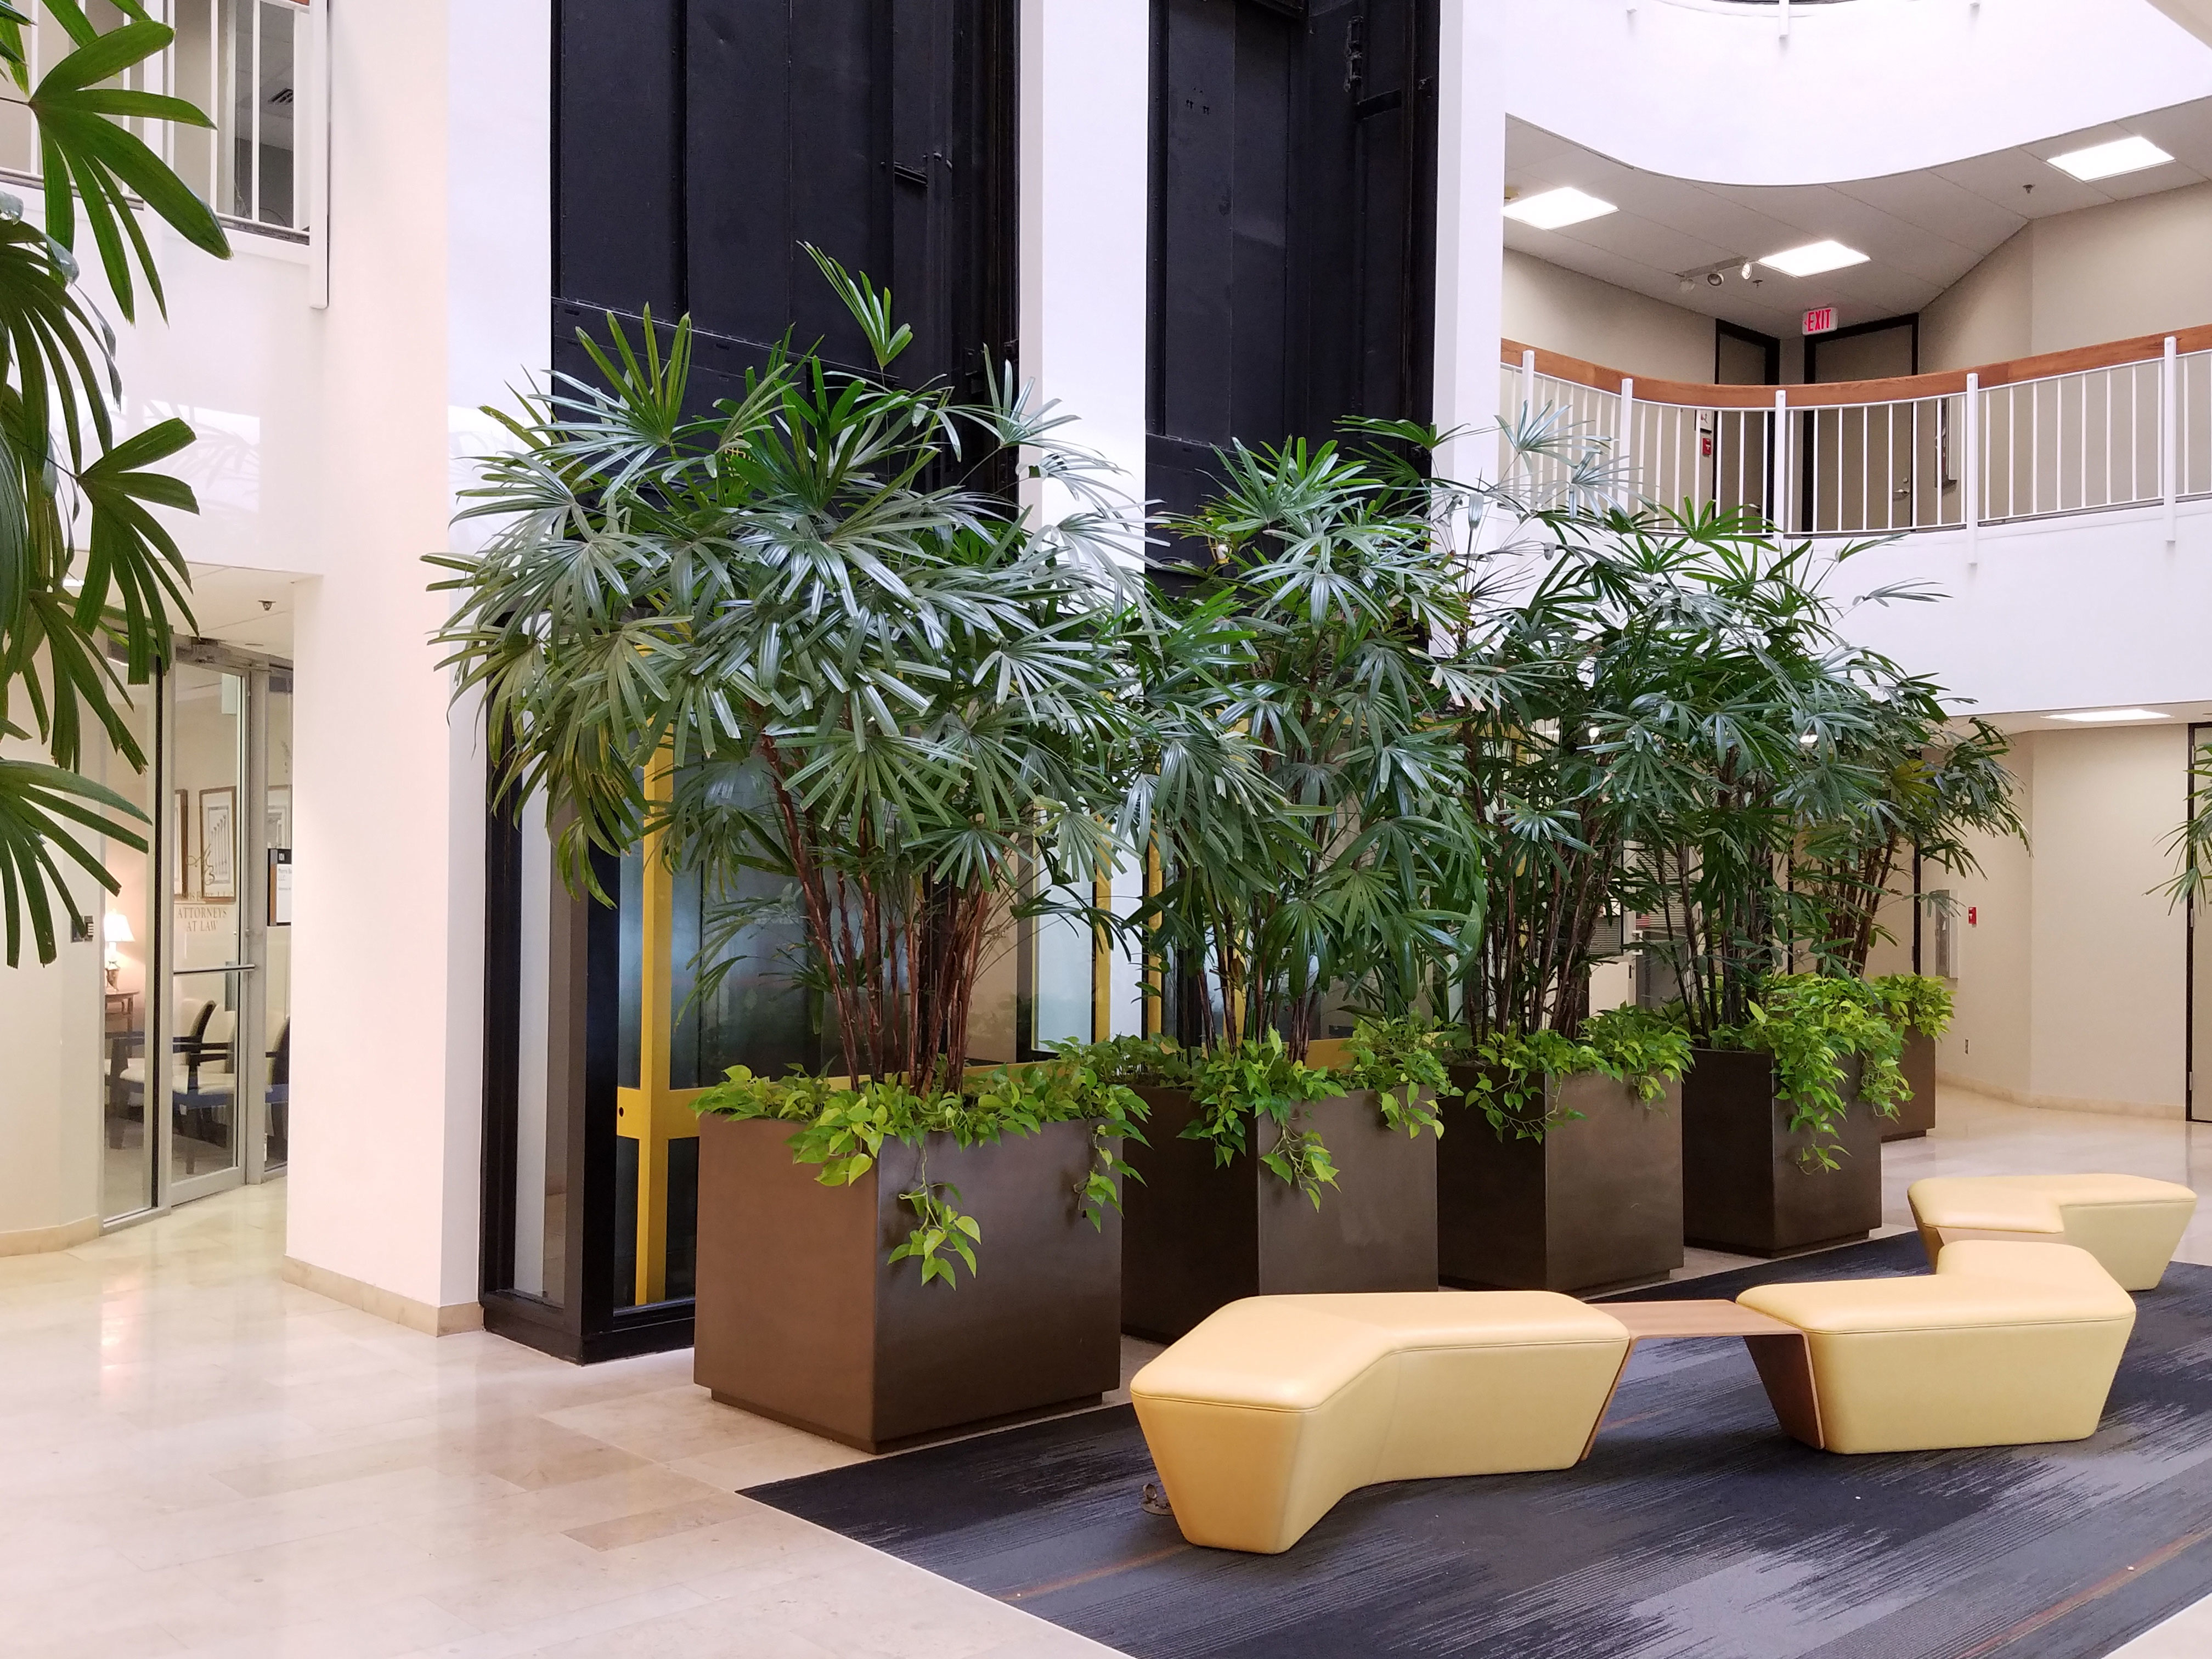 The lobby of the Xerox Building where Morris Bart's Baton Rouge office is located.